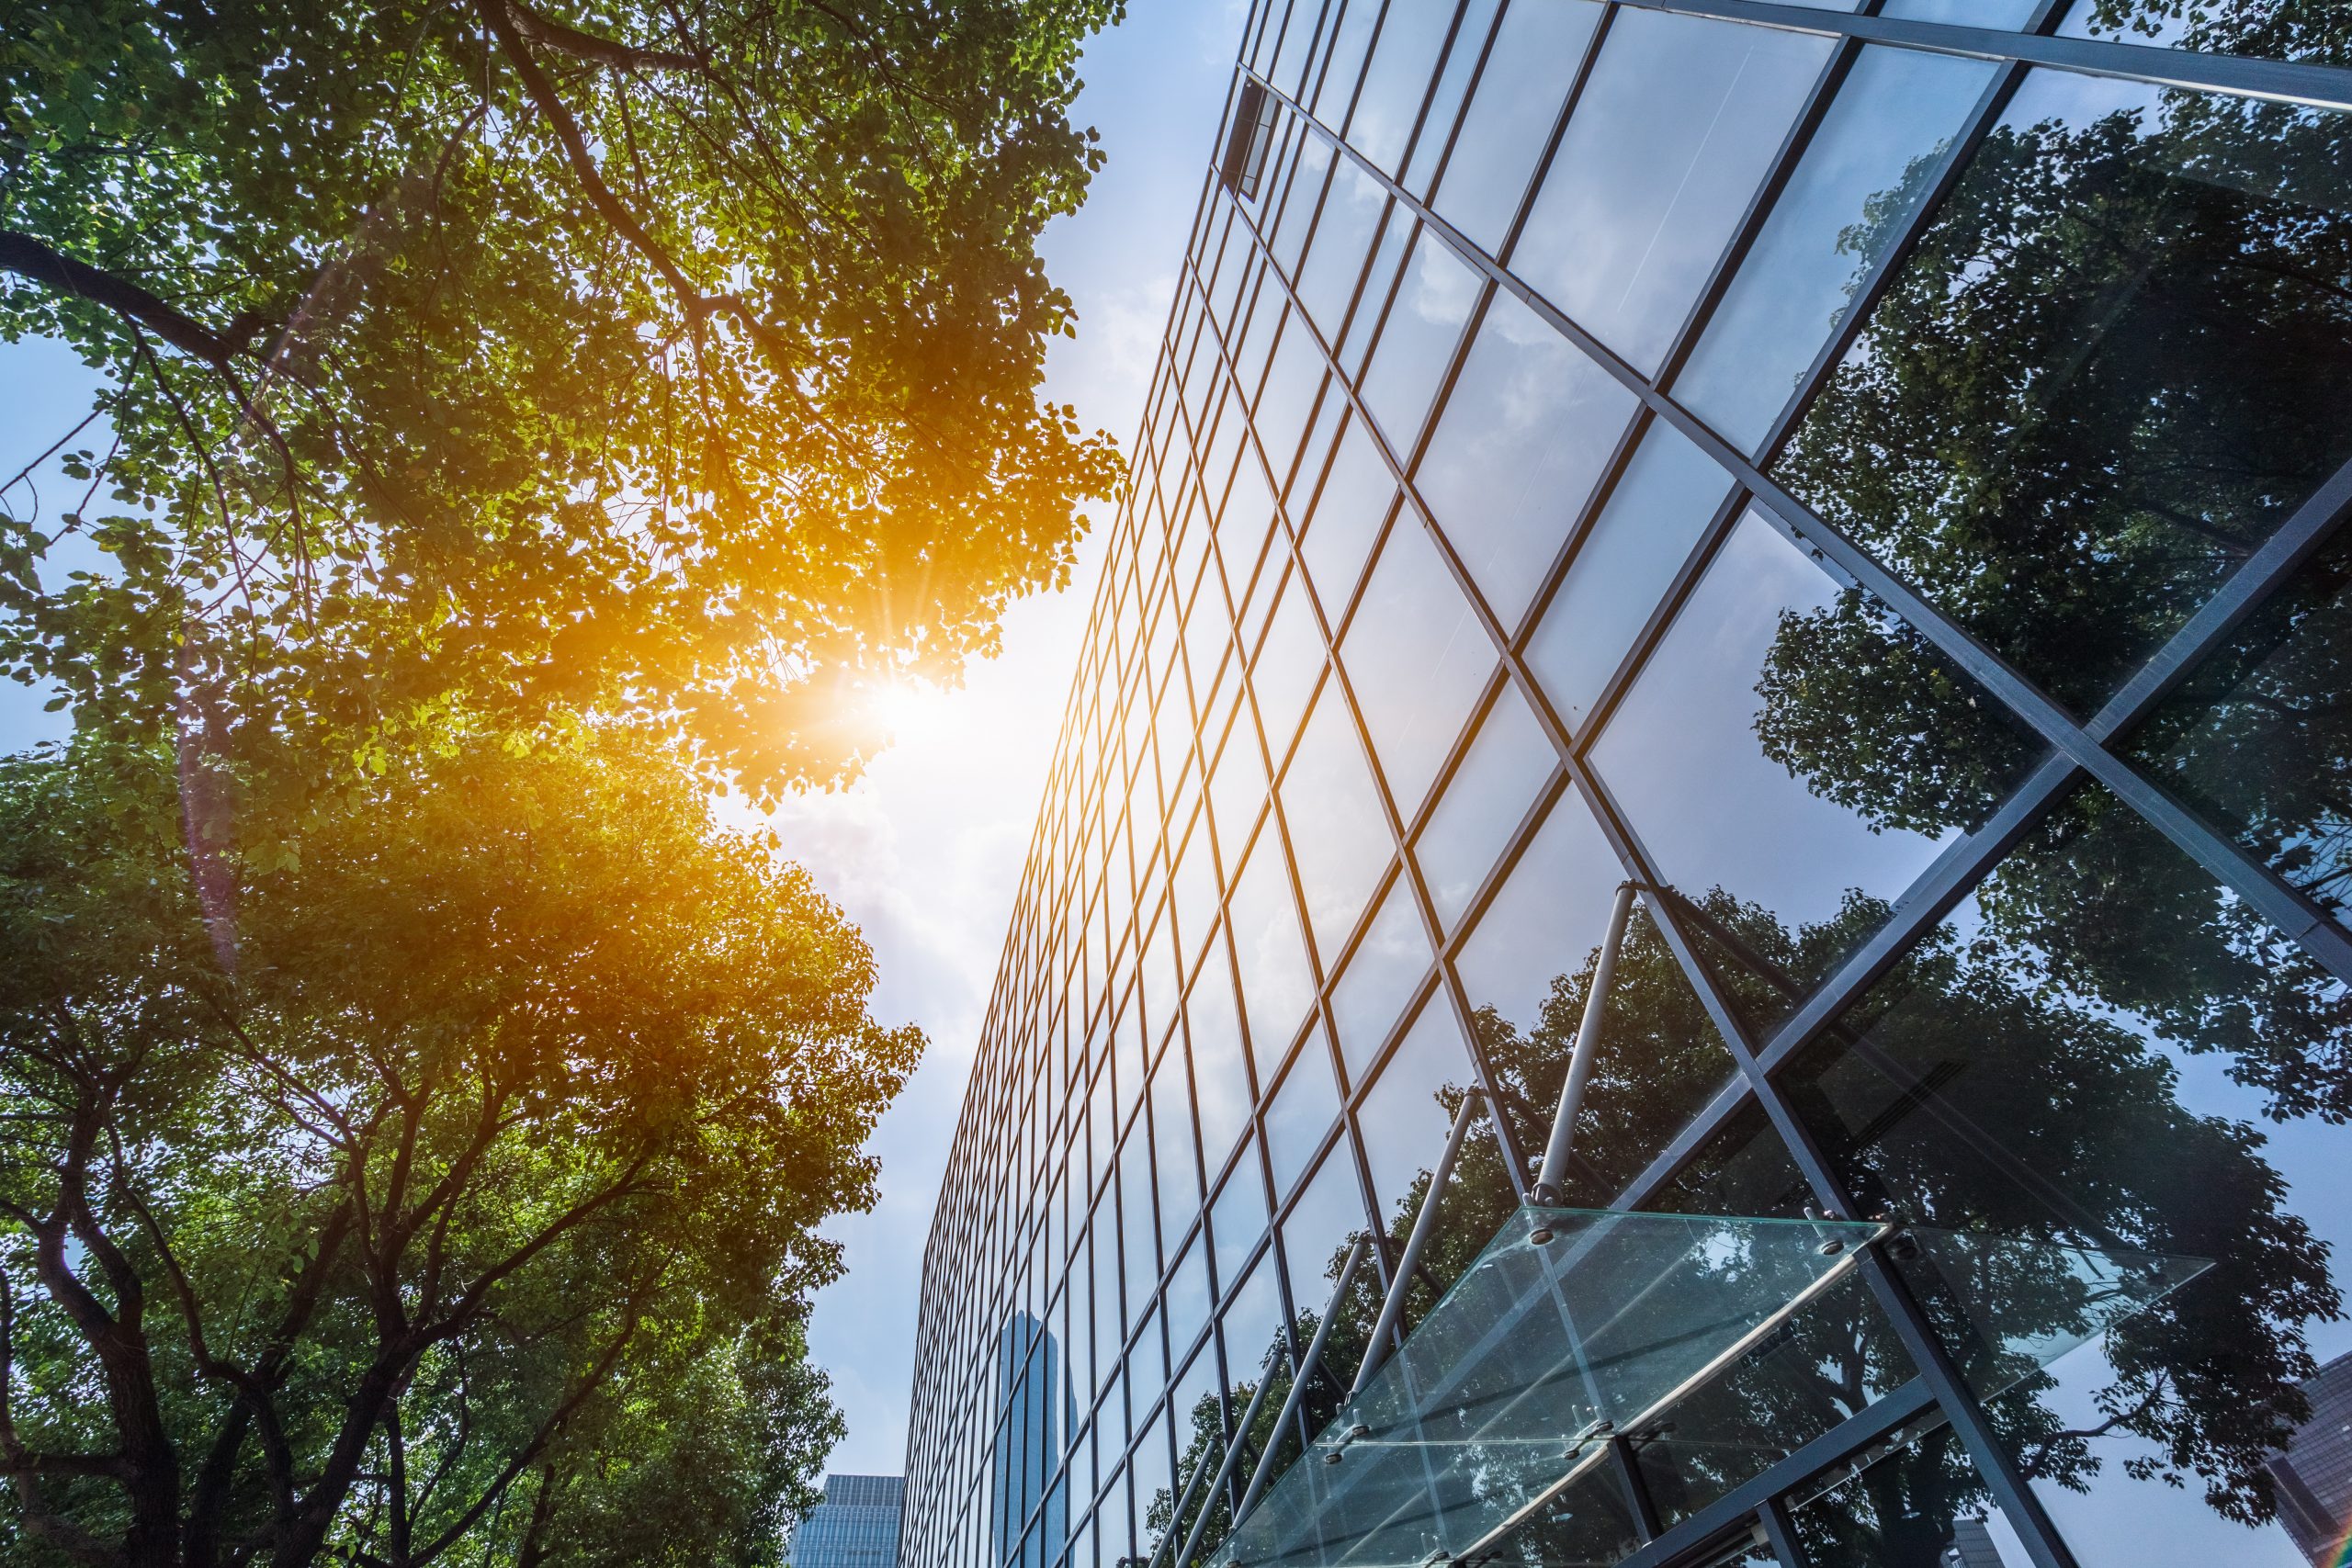 Looking up view of a glass building with trees and sun shining through